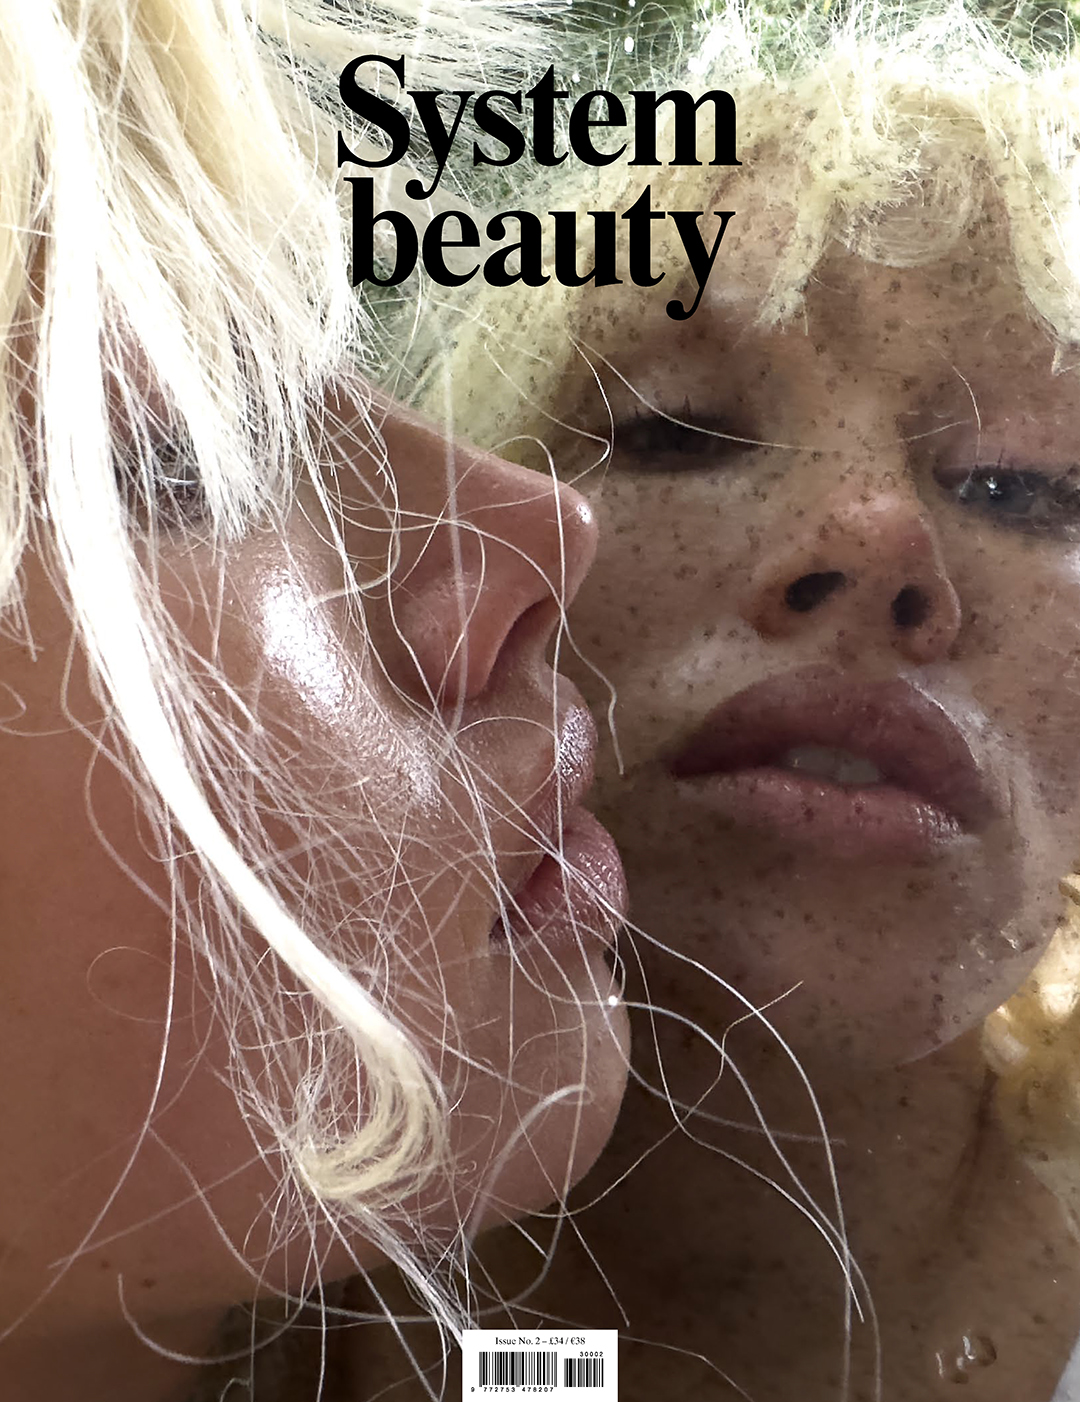 System beauty issue No. 2 – Isamaya Ffrench by Juergen Teller